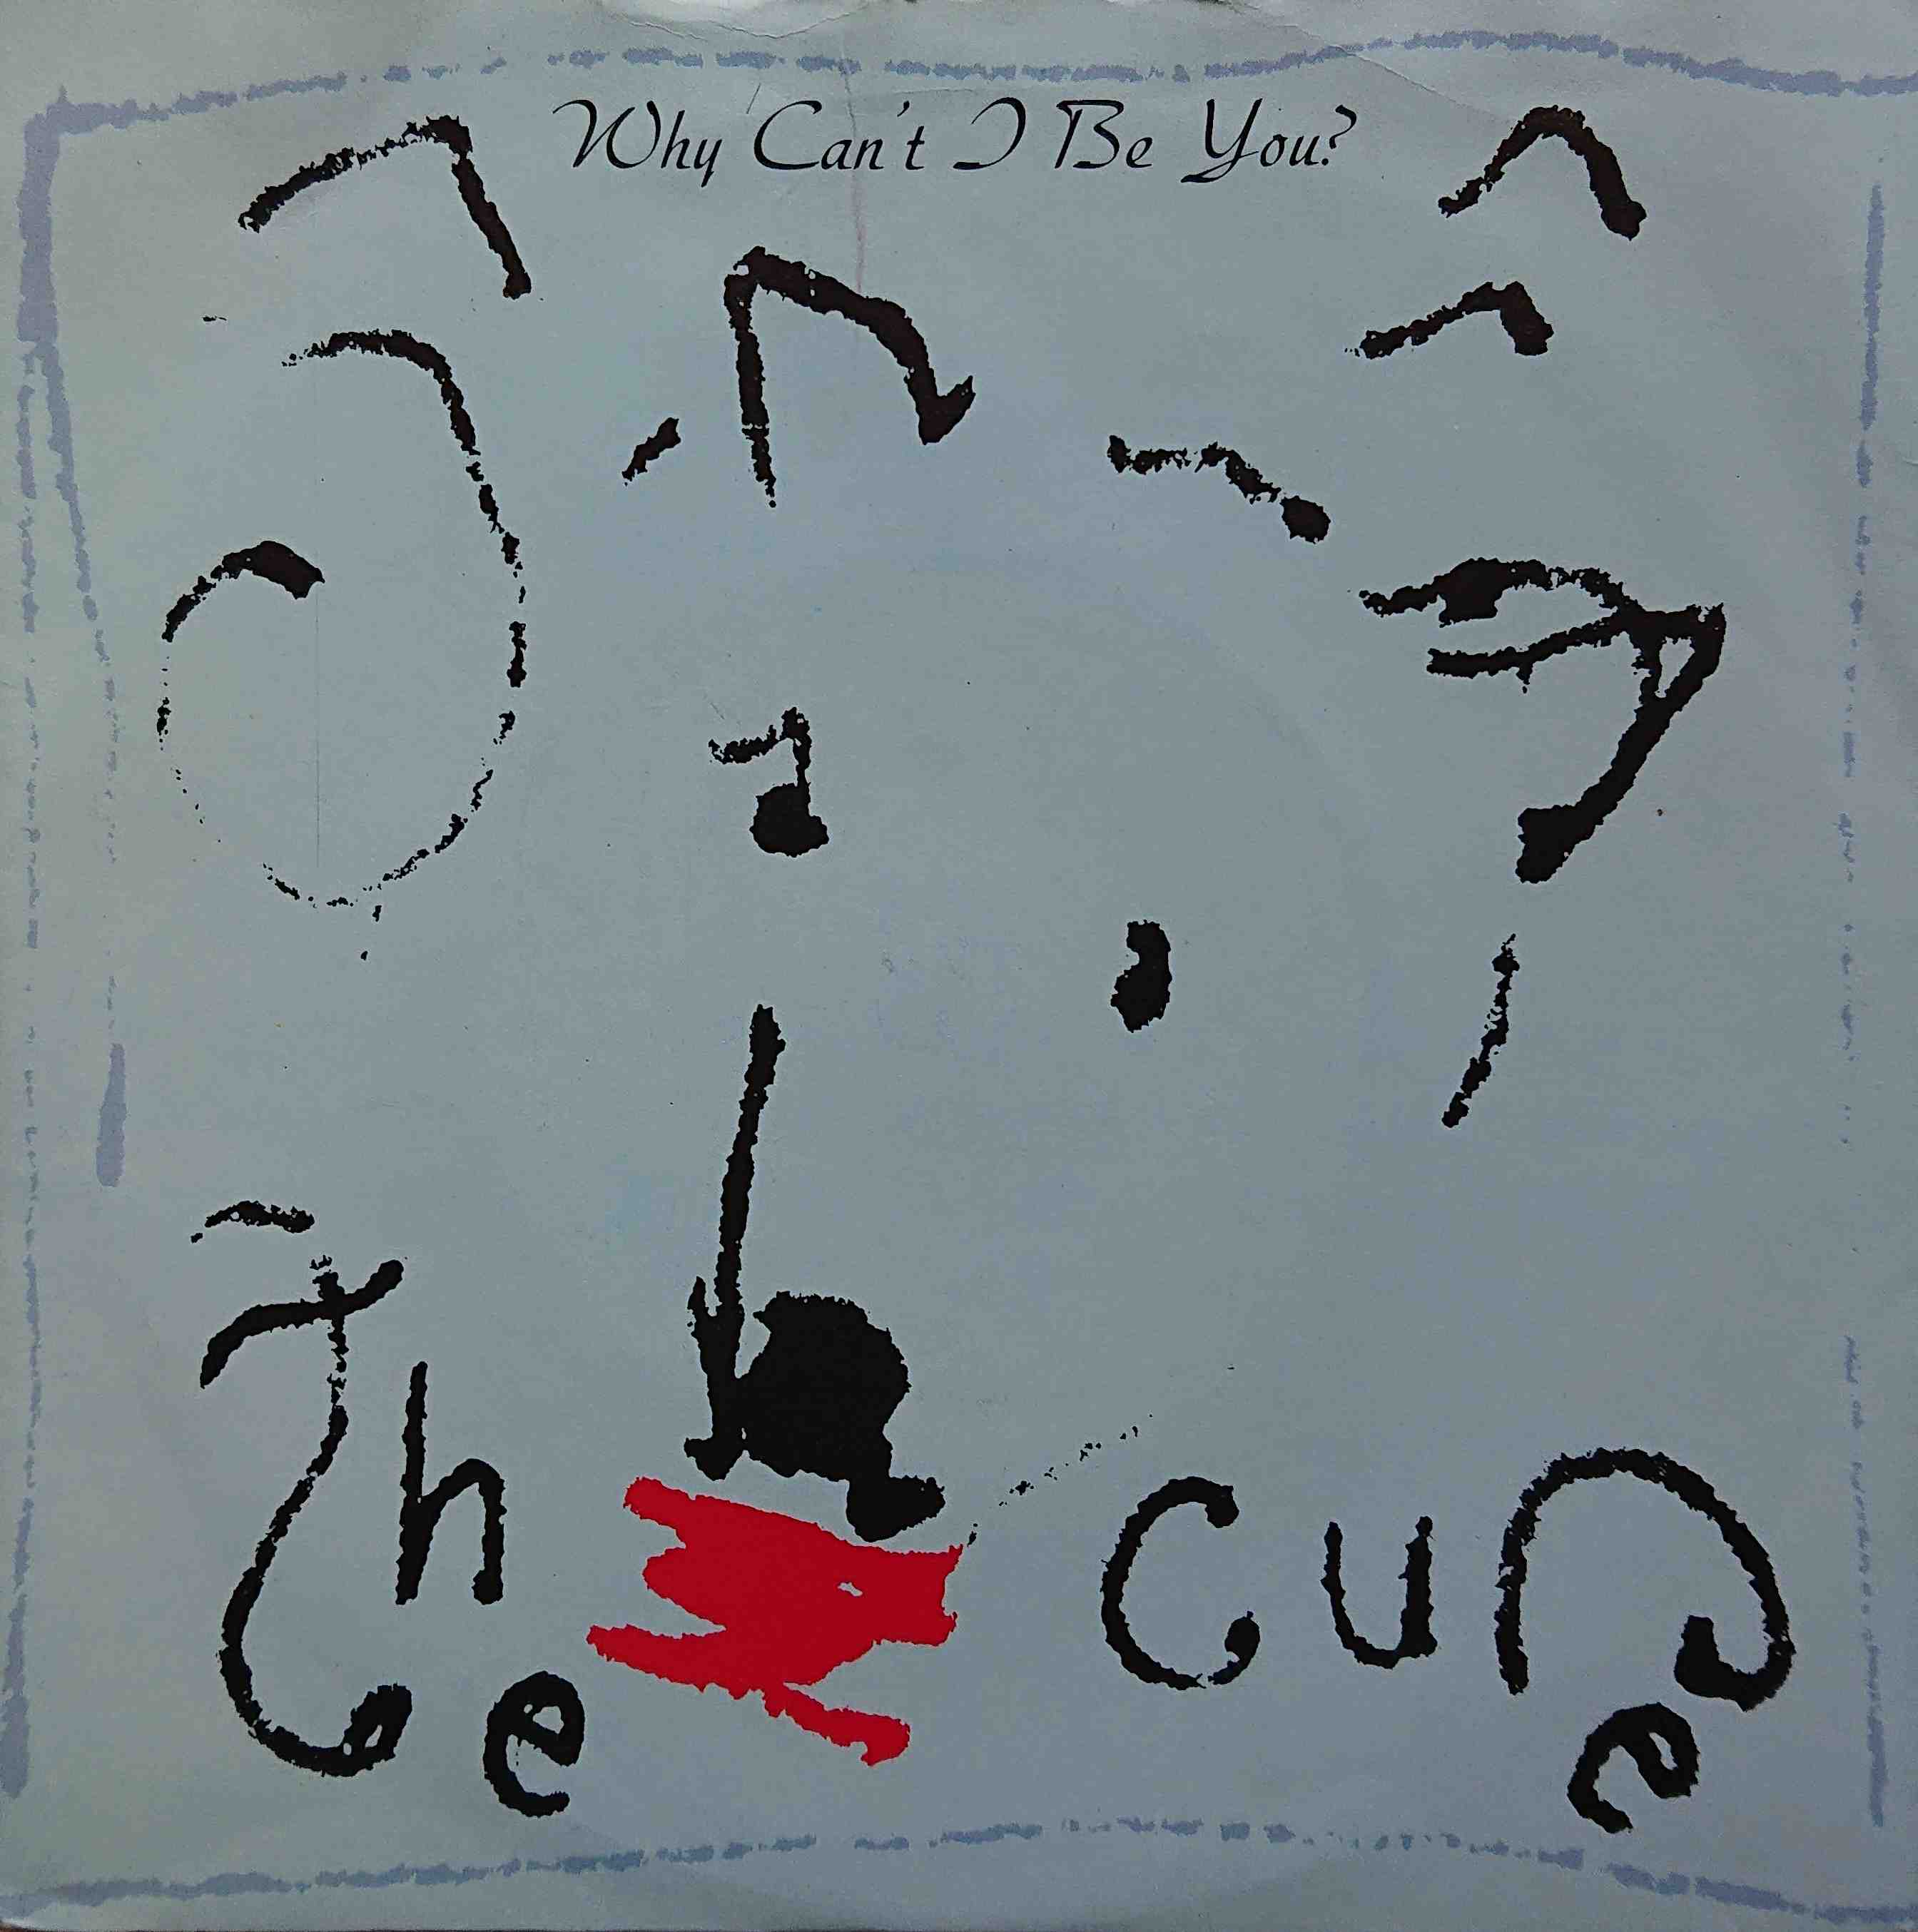 Picture of Why can't I be you by artist The Cure 